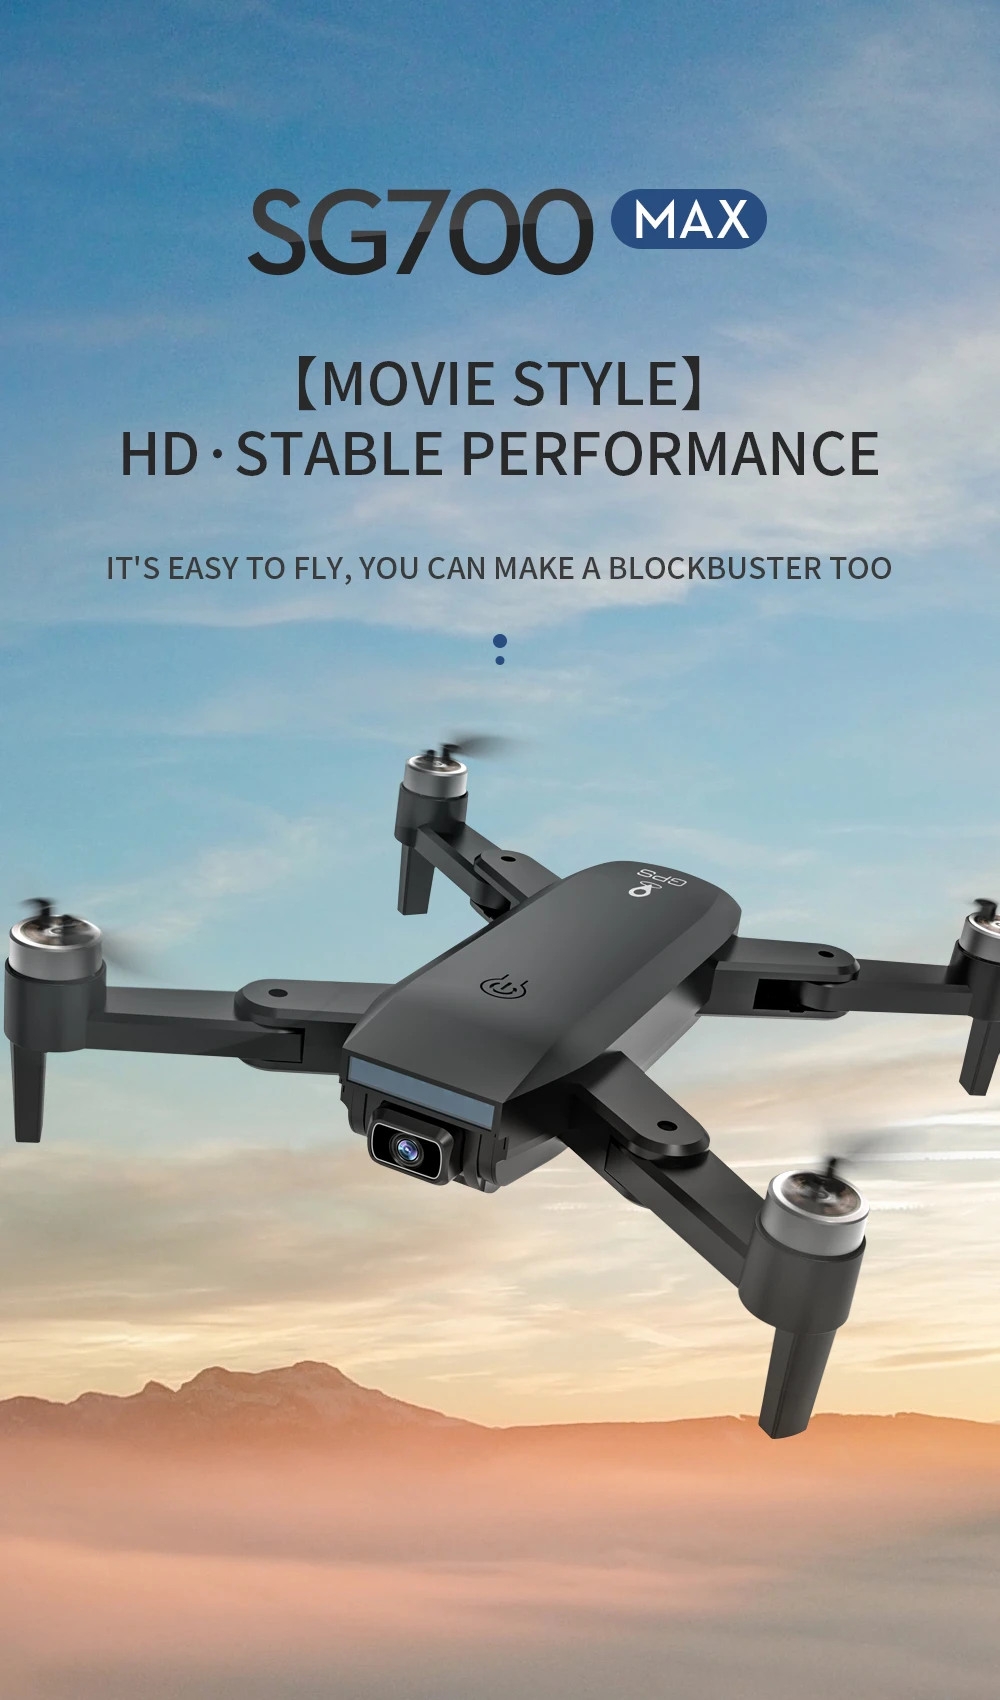 ZLL SG700 MAX 5G WIFI GPS with 4K HD Dual Camera 22mins Flight Time Optical Sale - Banggood USA Mobile-arrival notice